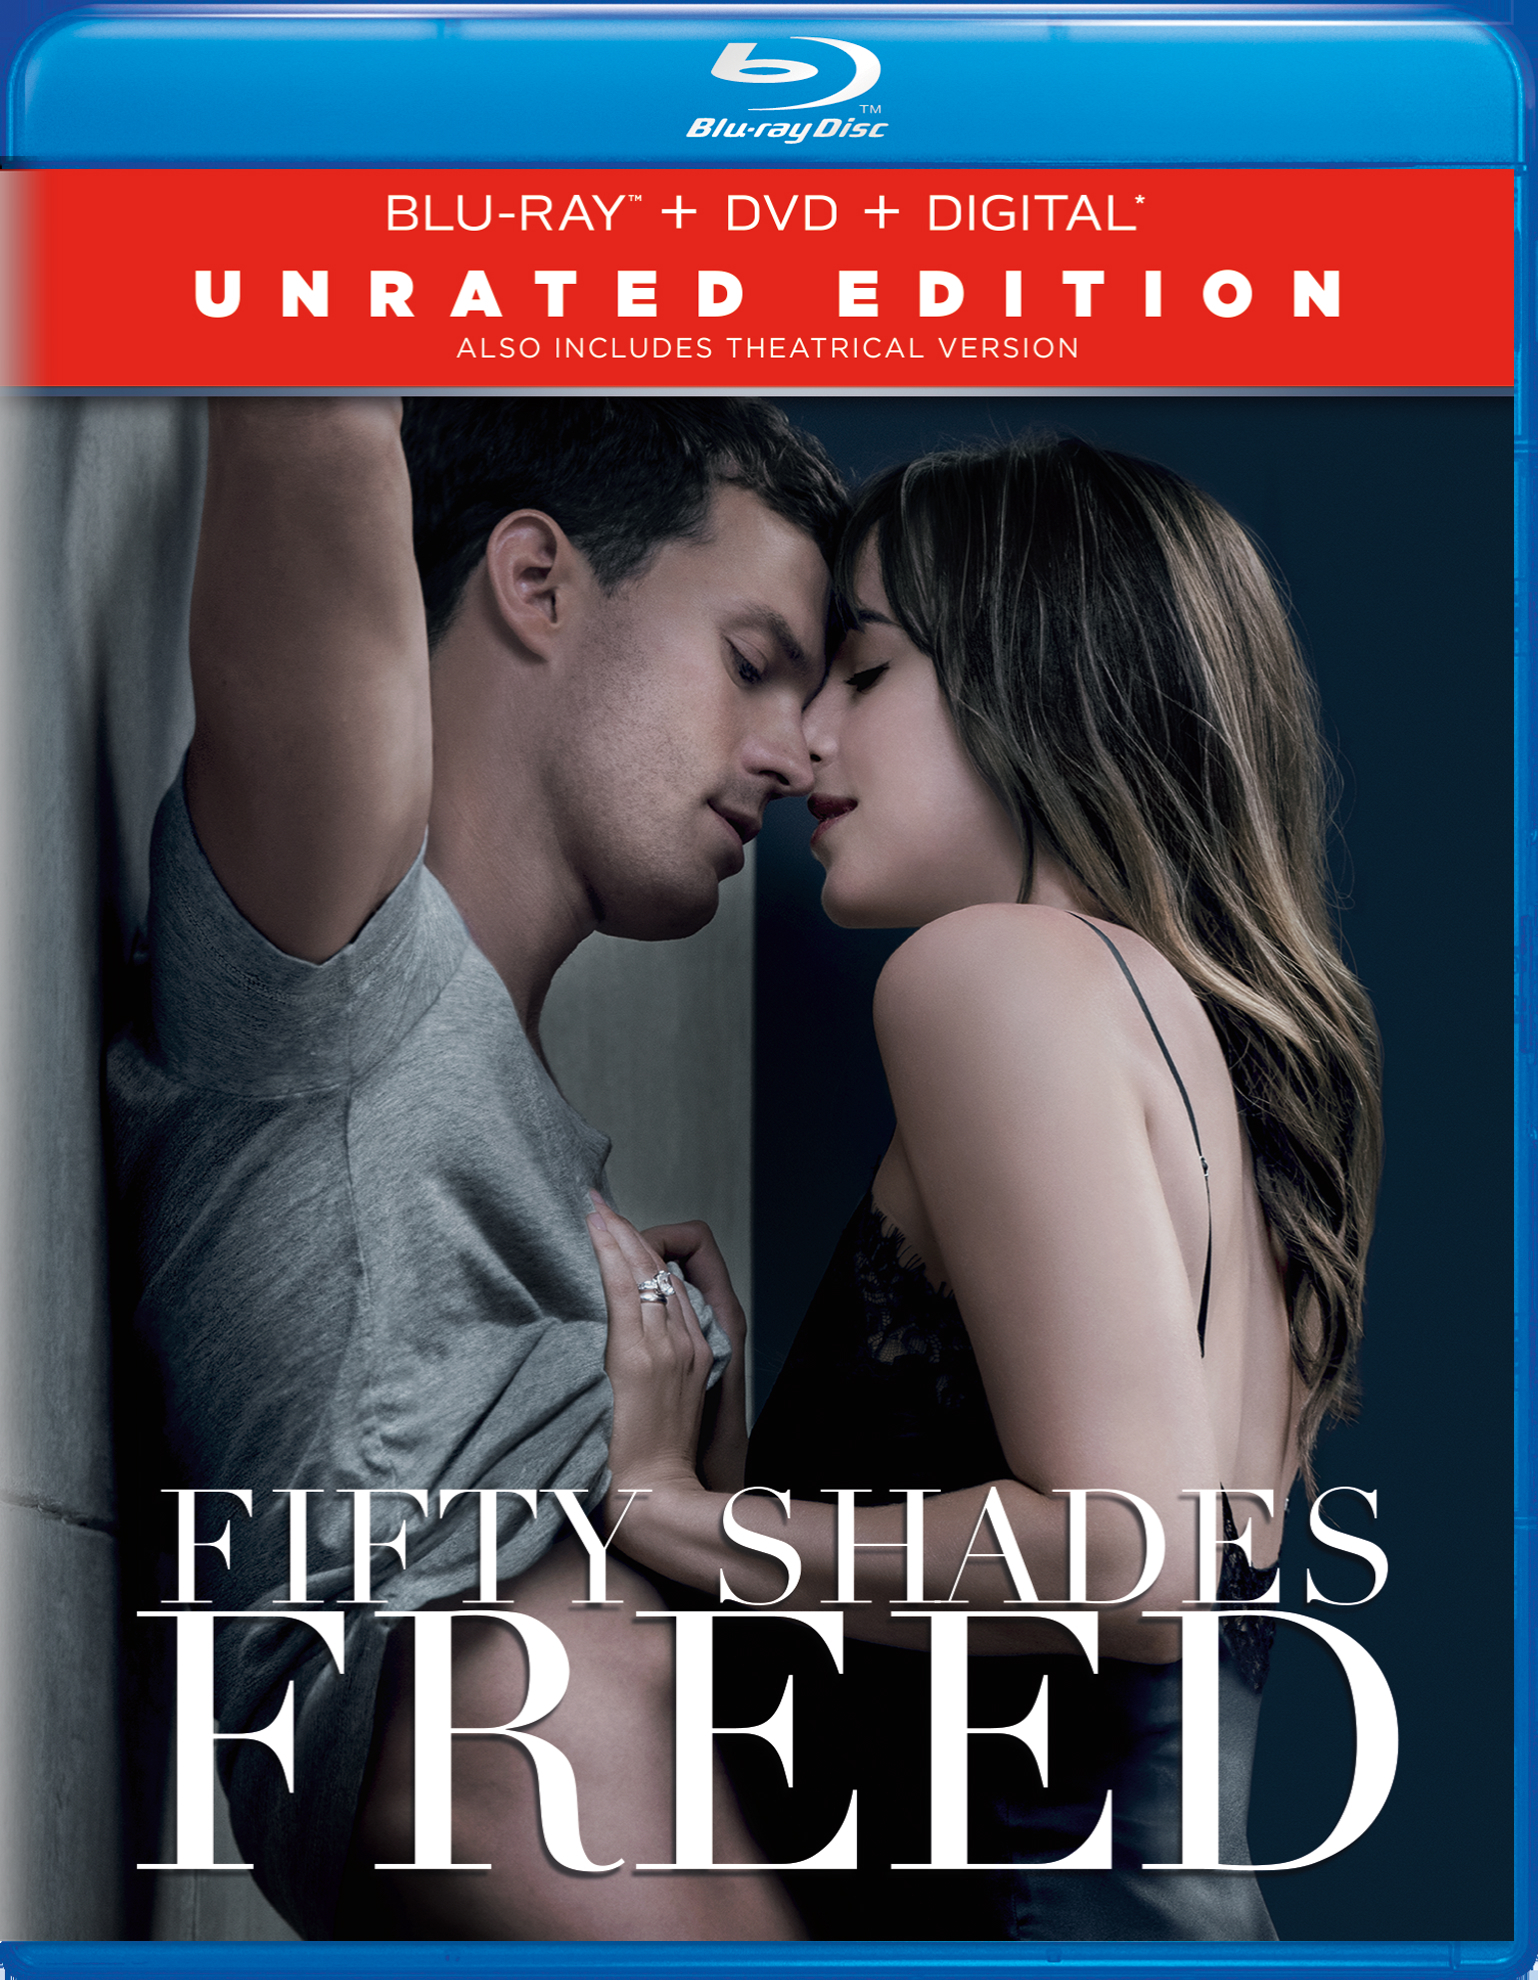 Fifty Shades Freed (Unrated Edition DVD + Digital) - Blu-ray [ 2018 ]  - Drama Movies On Blu-ray - Movies On GRUV